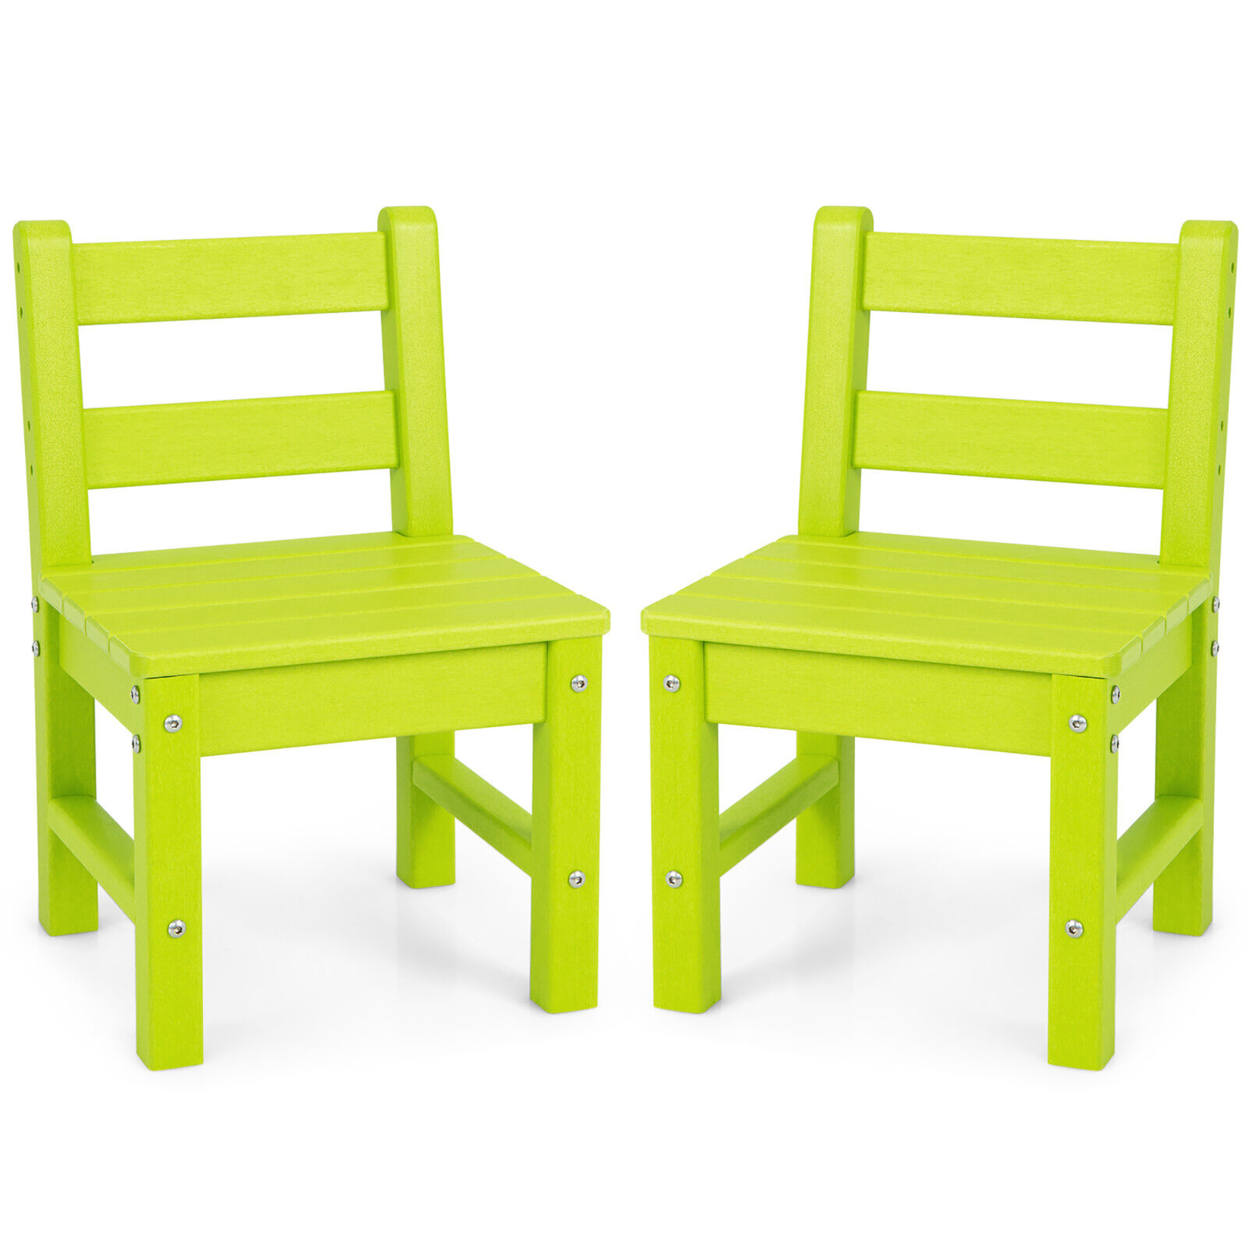 2 PCS Kids Chairs Indoor Outdoor Heavy-Duty All-Weather Children Learning Chair - Green